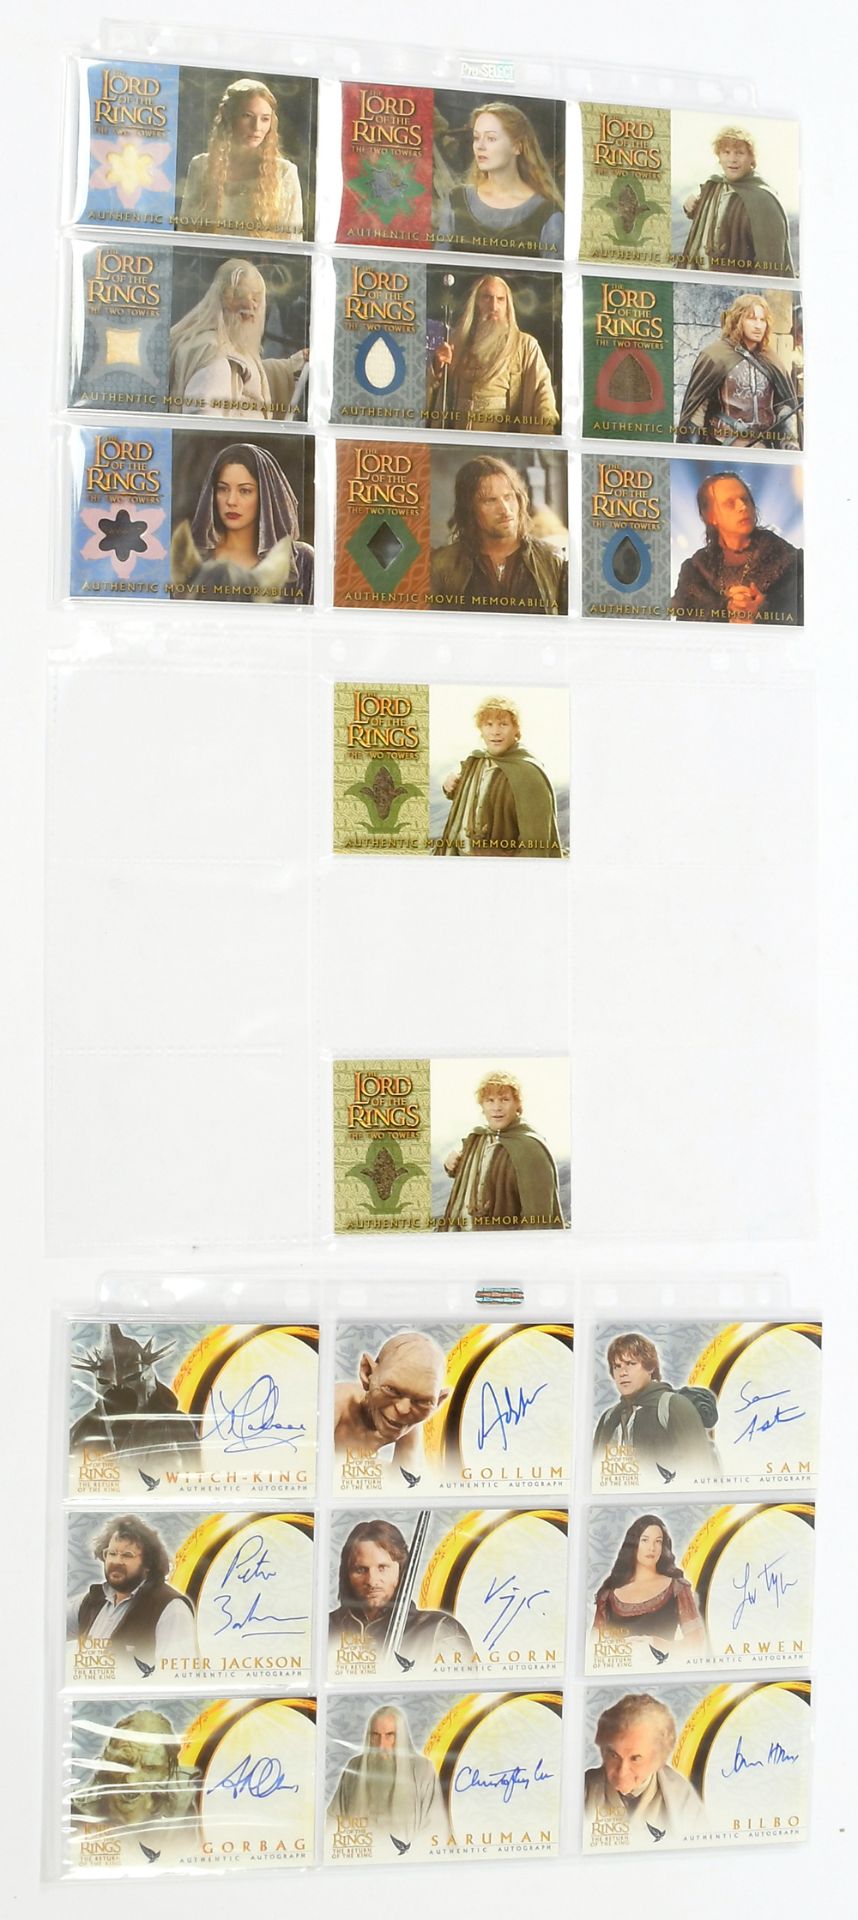 GRP inc Topps The Lord of the Rings Autograph - Image 5 of 9